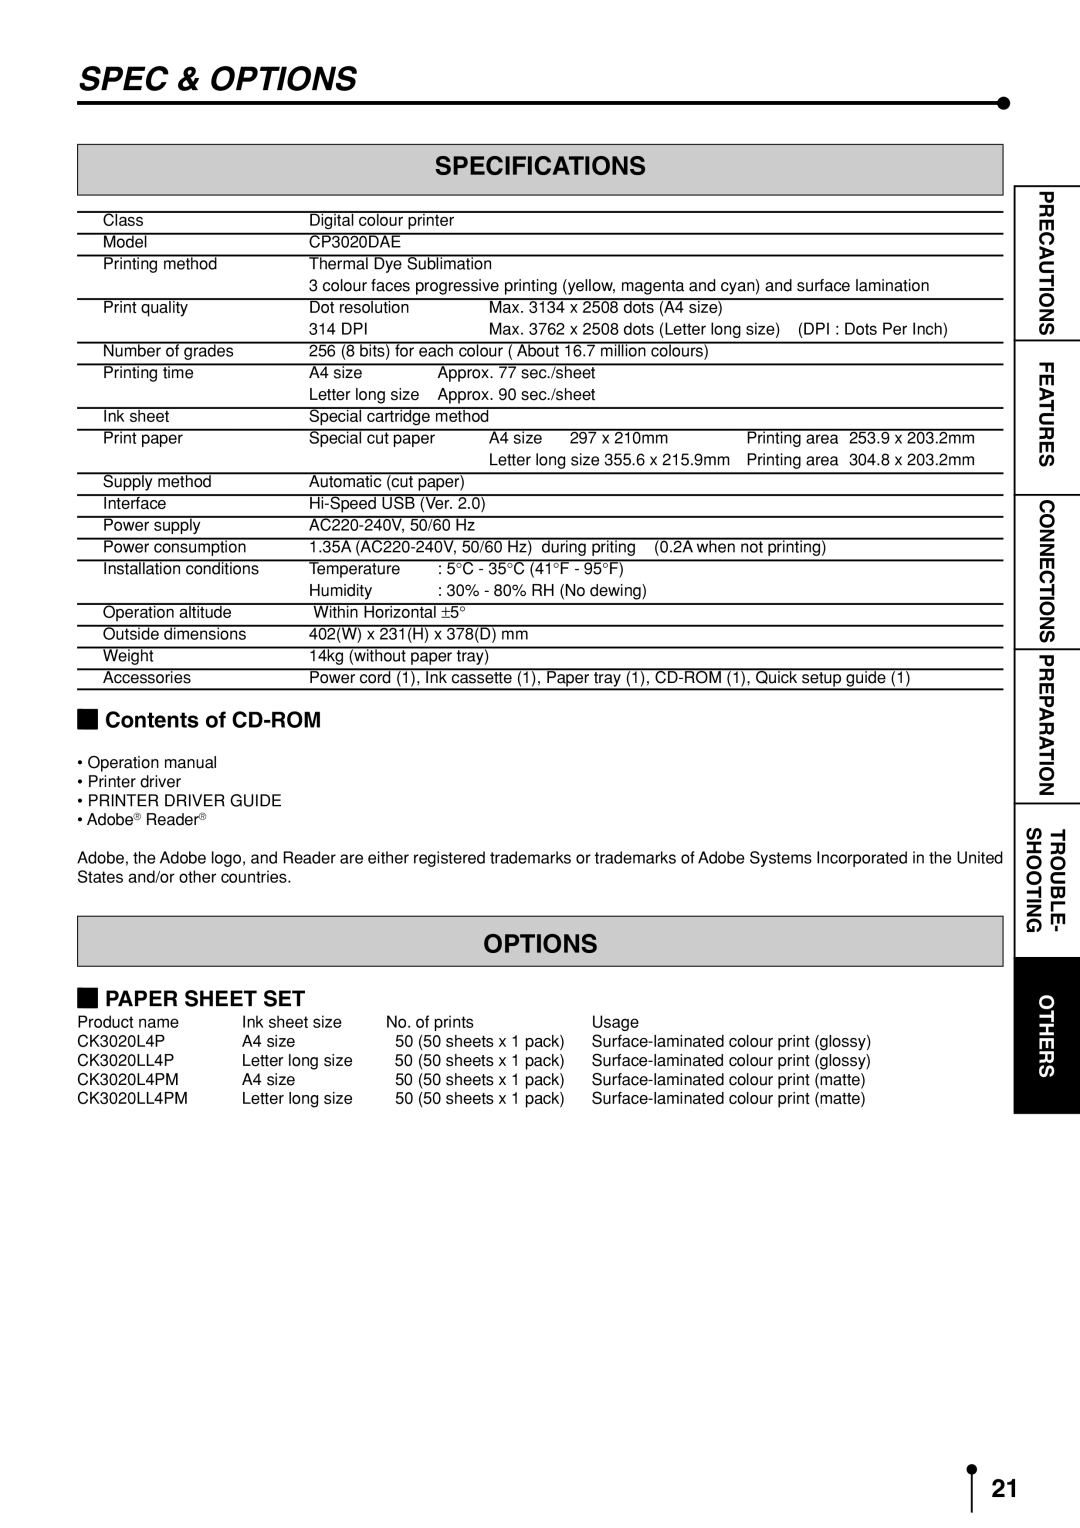 Mitsubishi Electronics CP3020DAE operation manual Spec & Options, Specifications 